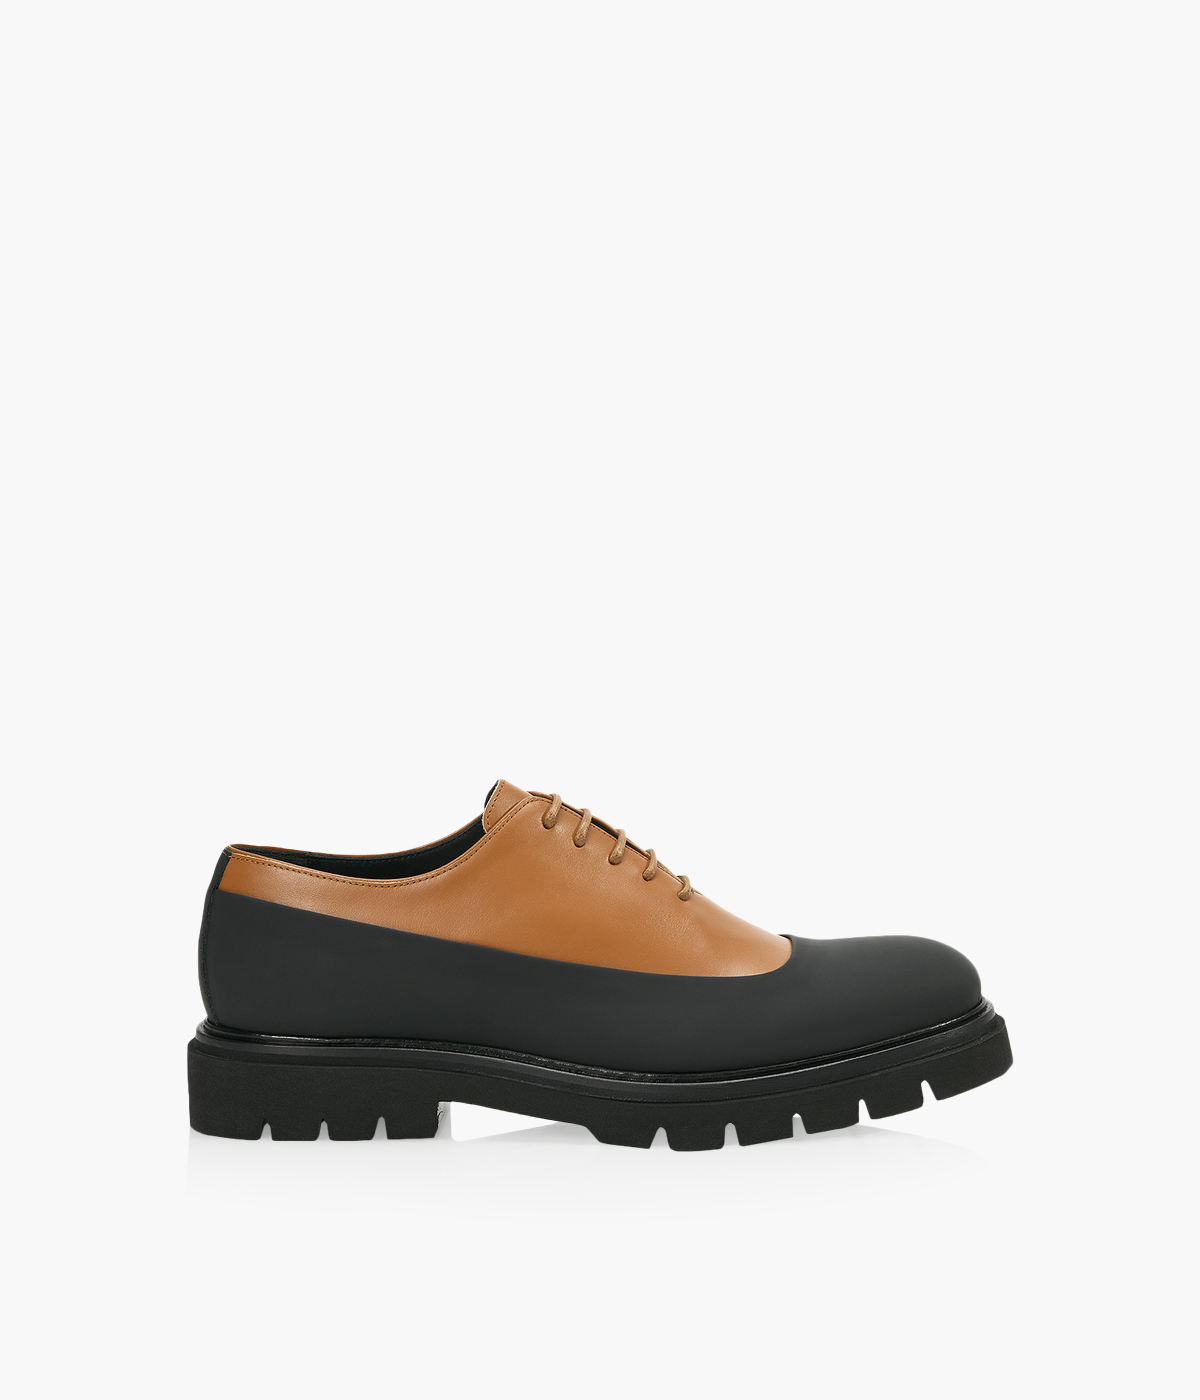 INTENSI CLOVELLY - Leather | Browns Shoes